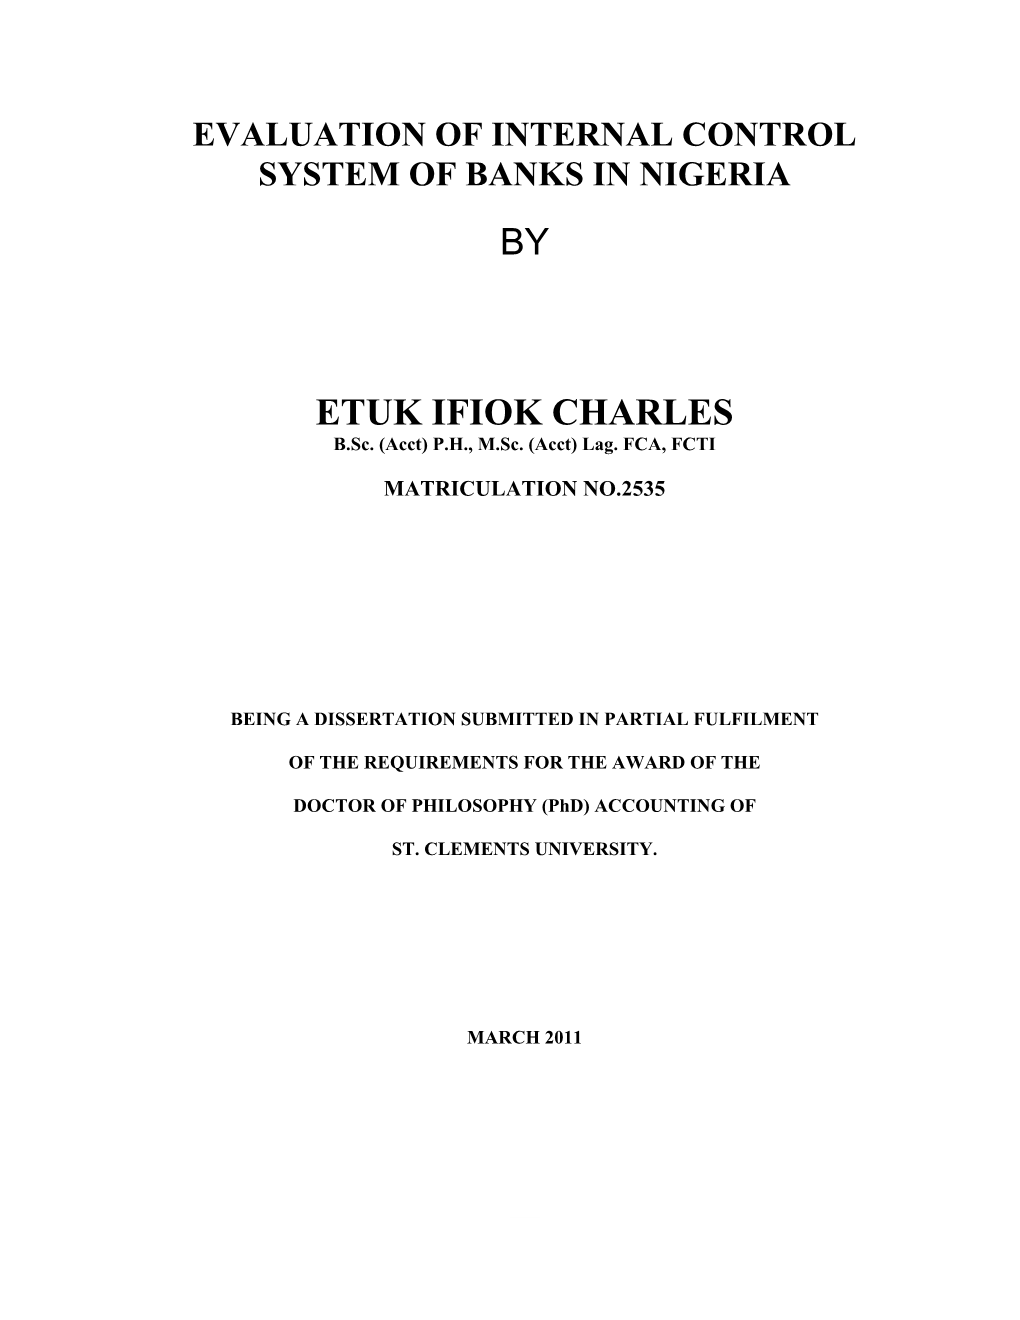 Evaluation of Internal Control Systems of Banks in Nigeria